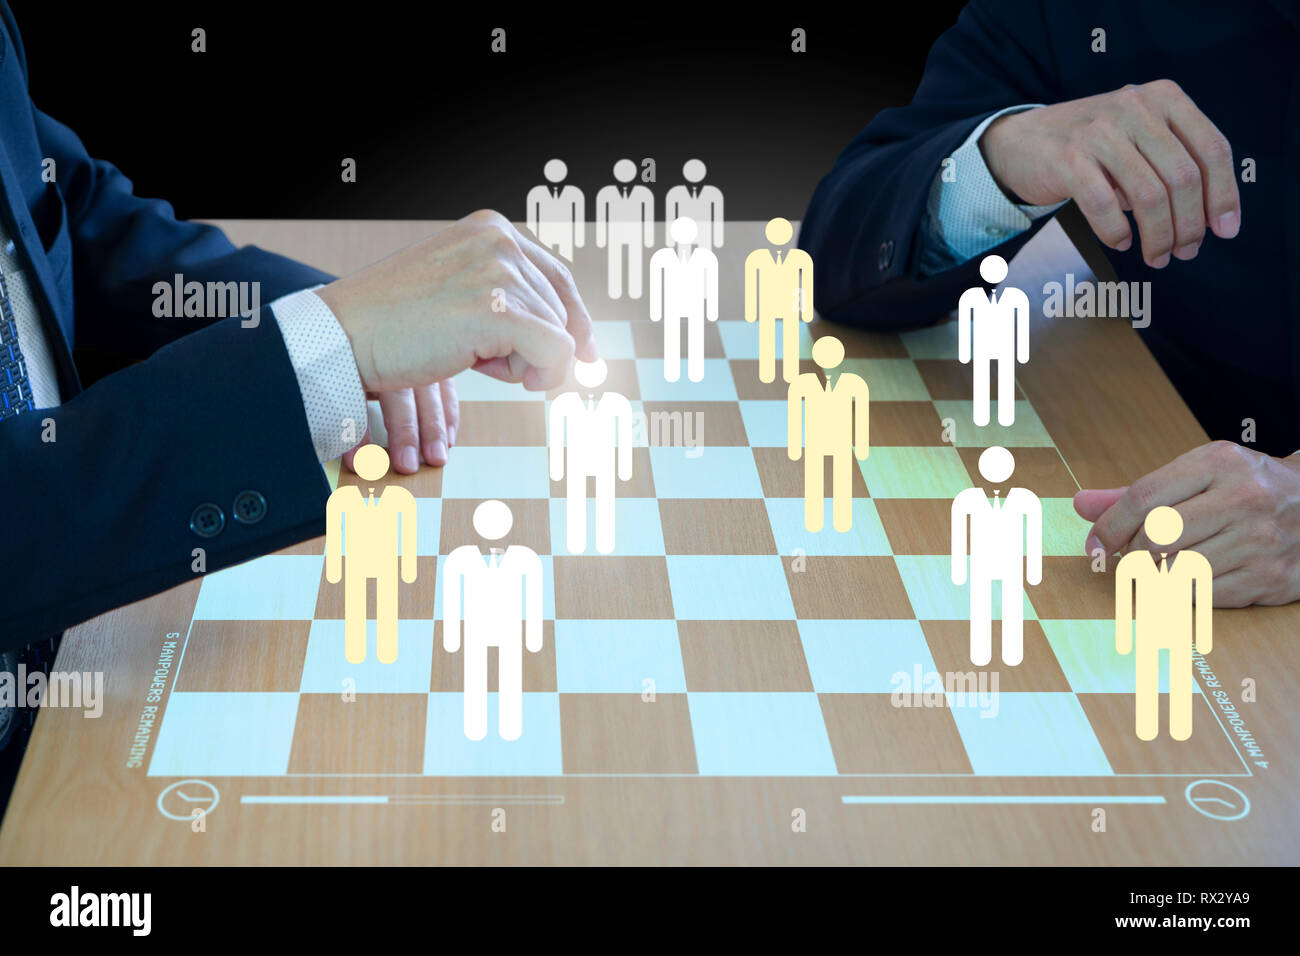 Three business administrators playing checkers or draughts on a wooden virtual checkerboard or draughtboard in concept of manpower or human resource. Stock Photo